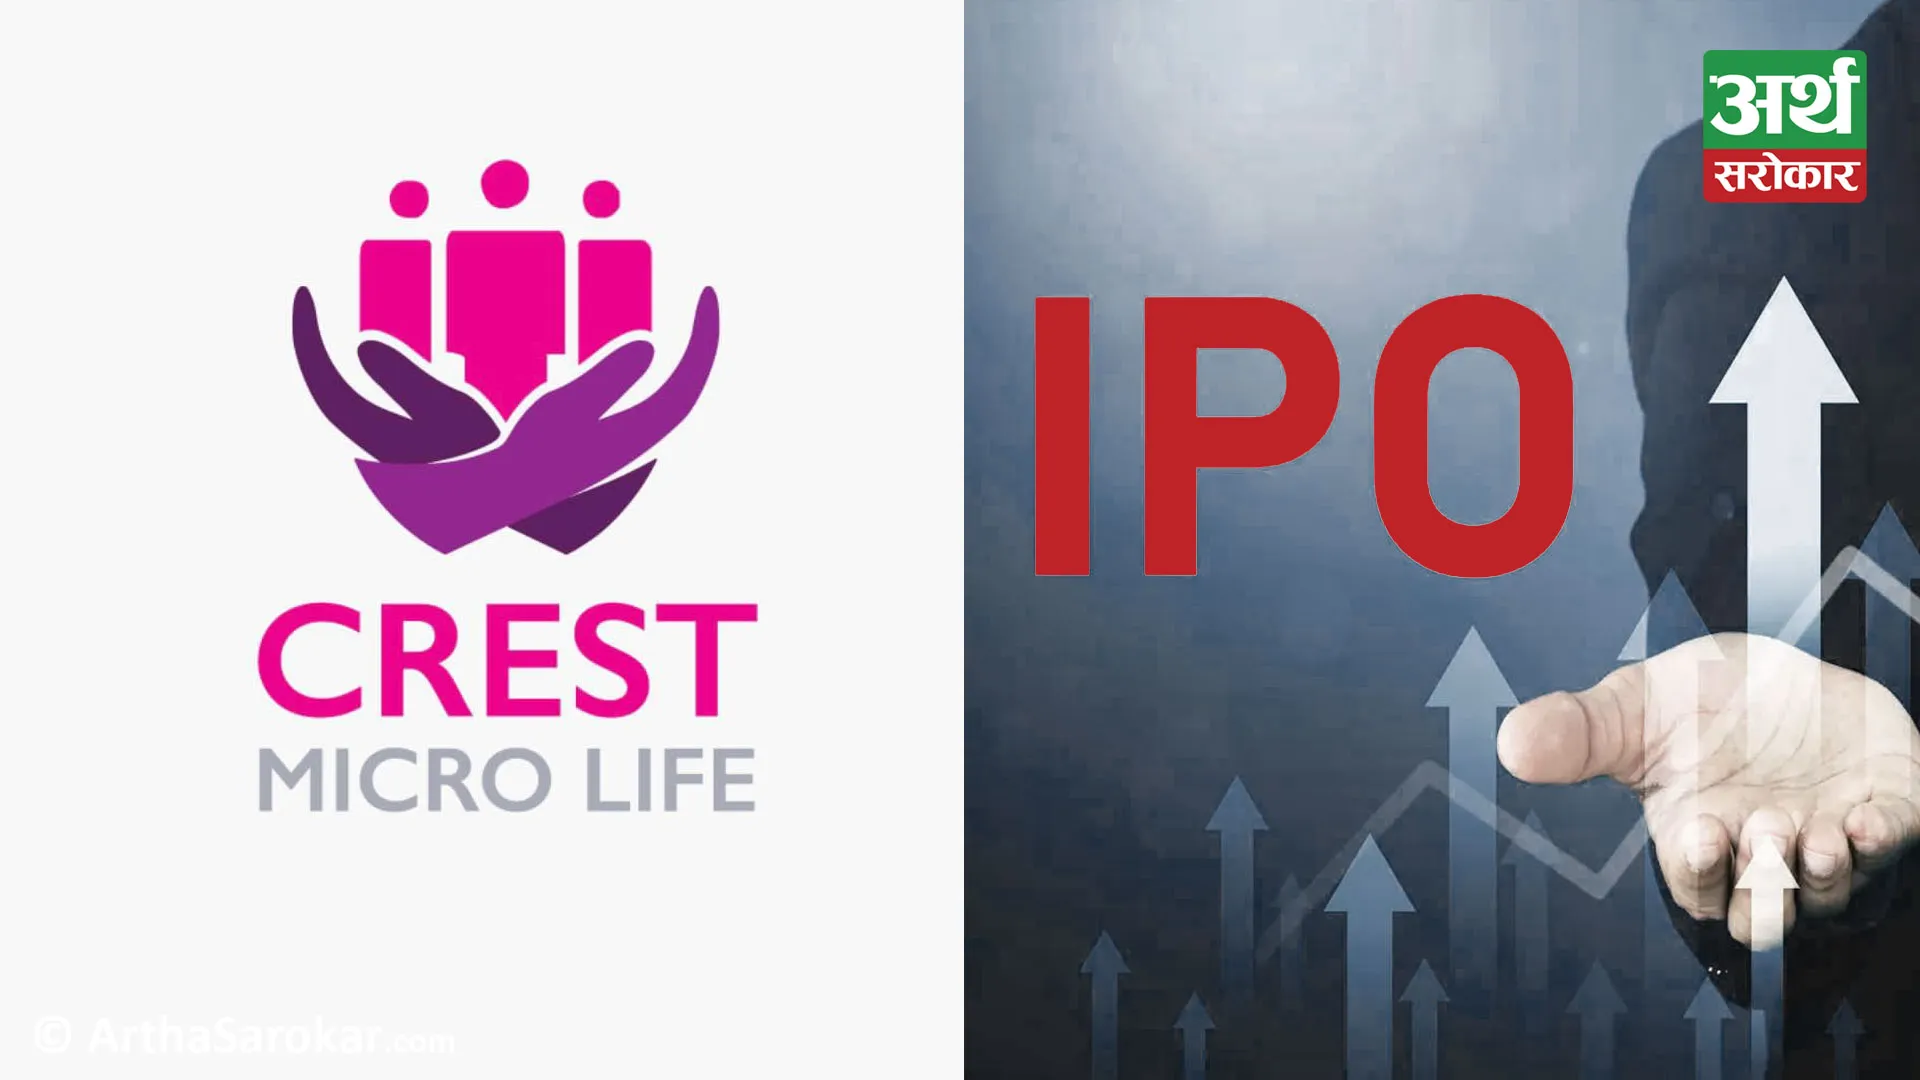 Crest Micro Life Insurance is planning to issue an IPO